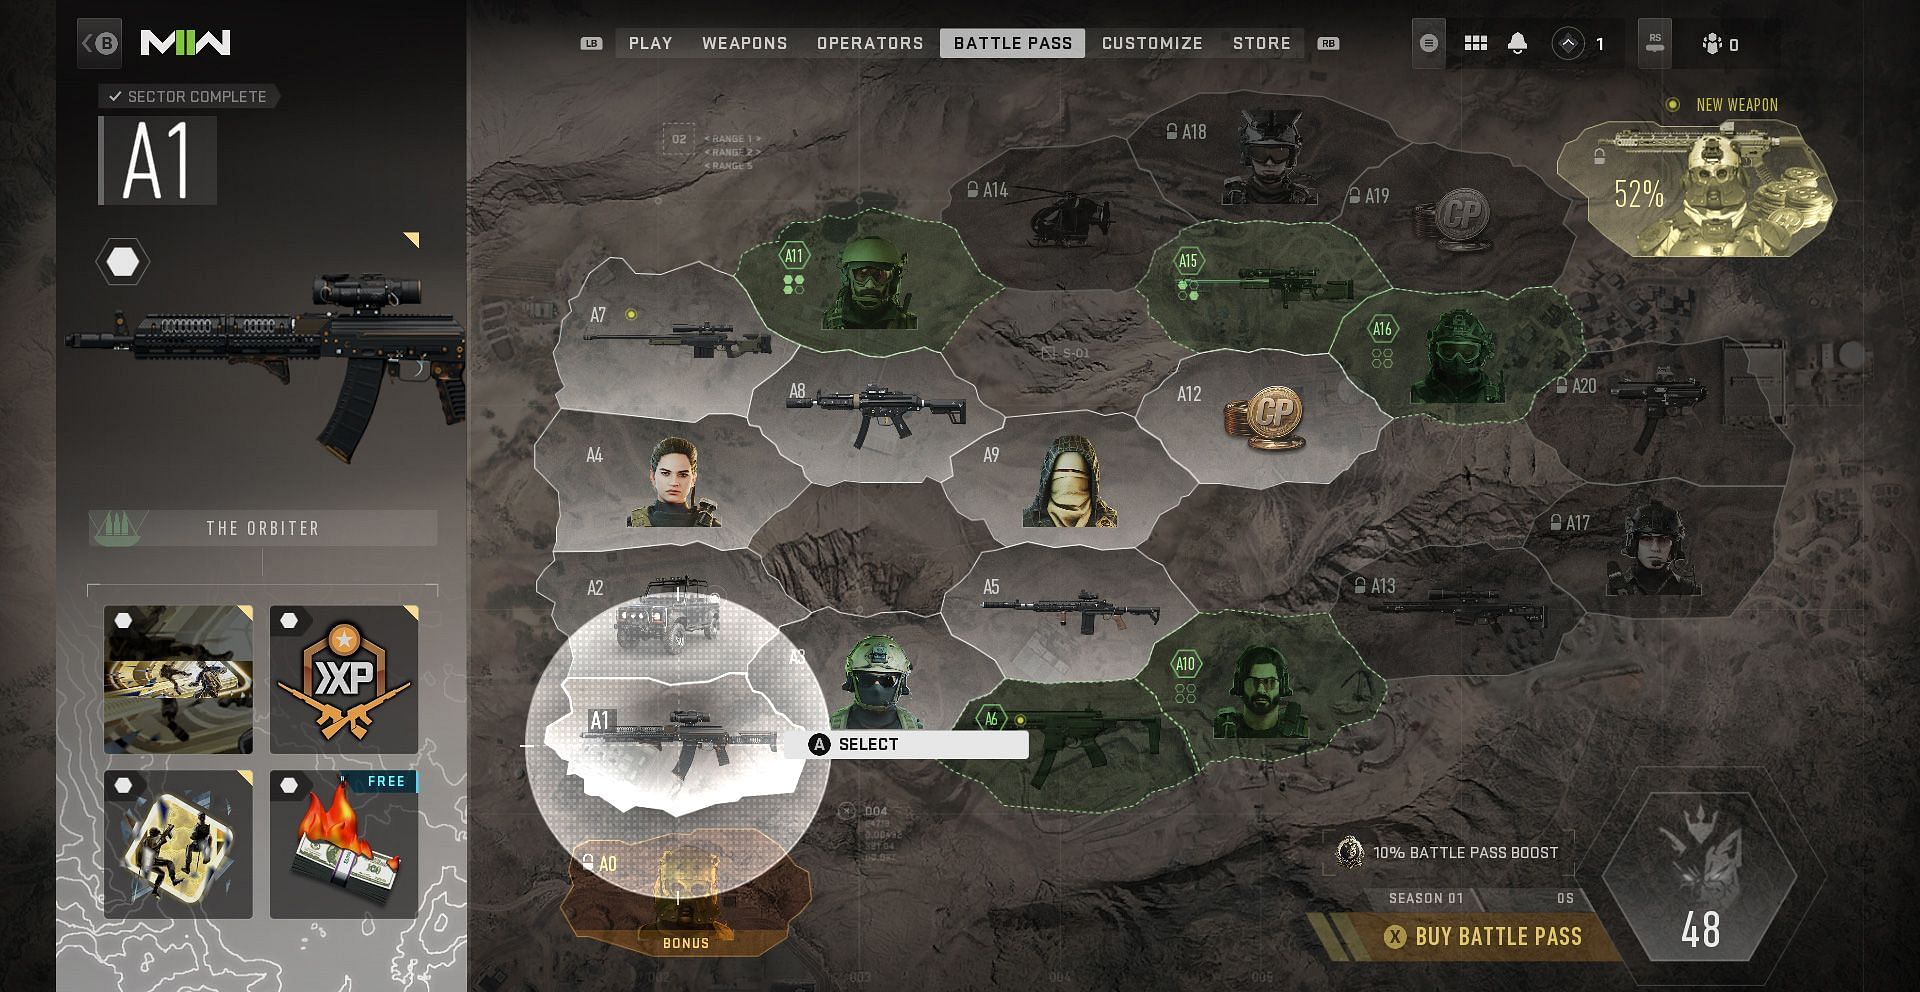 The new Modern Warfare 2 and Warzone 2 Battle Pass system showing all Sectors (Image via Activision)